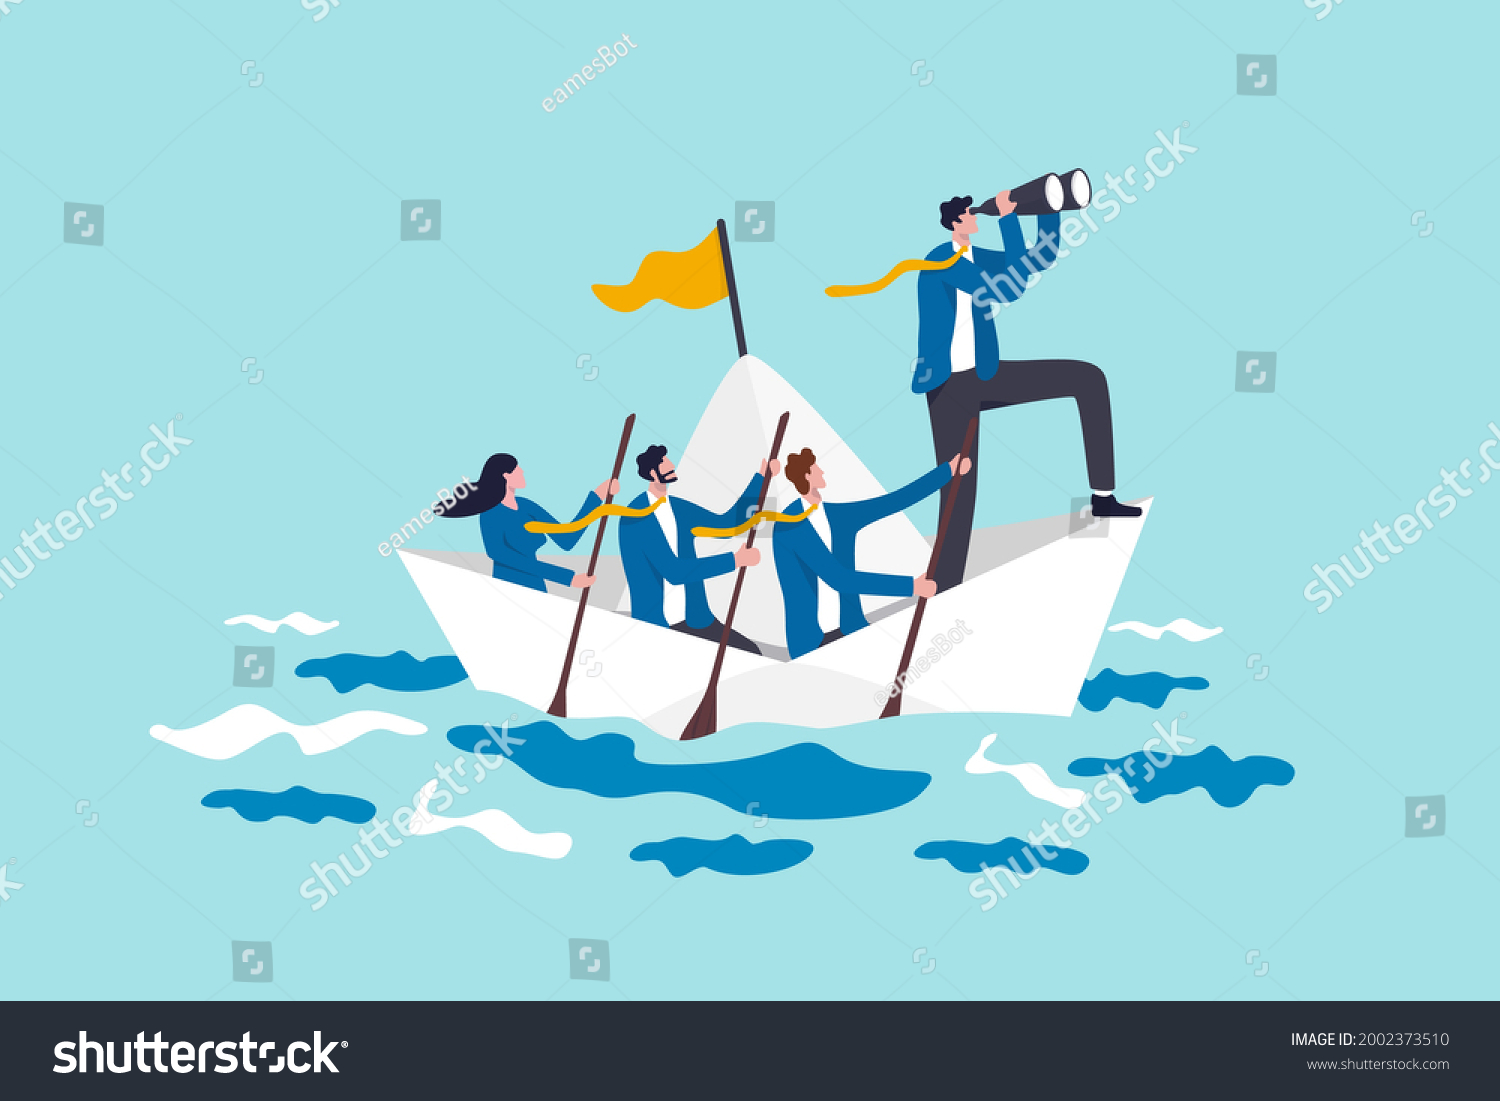 Leadership to lead business in crisis, teamwork or support to achieve target, vision or forward strategy for success concept, businessman leader with binoculars lead business team sailing origami ship #2002373510